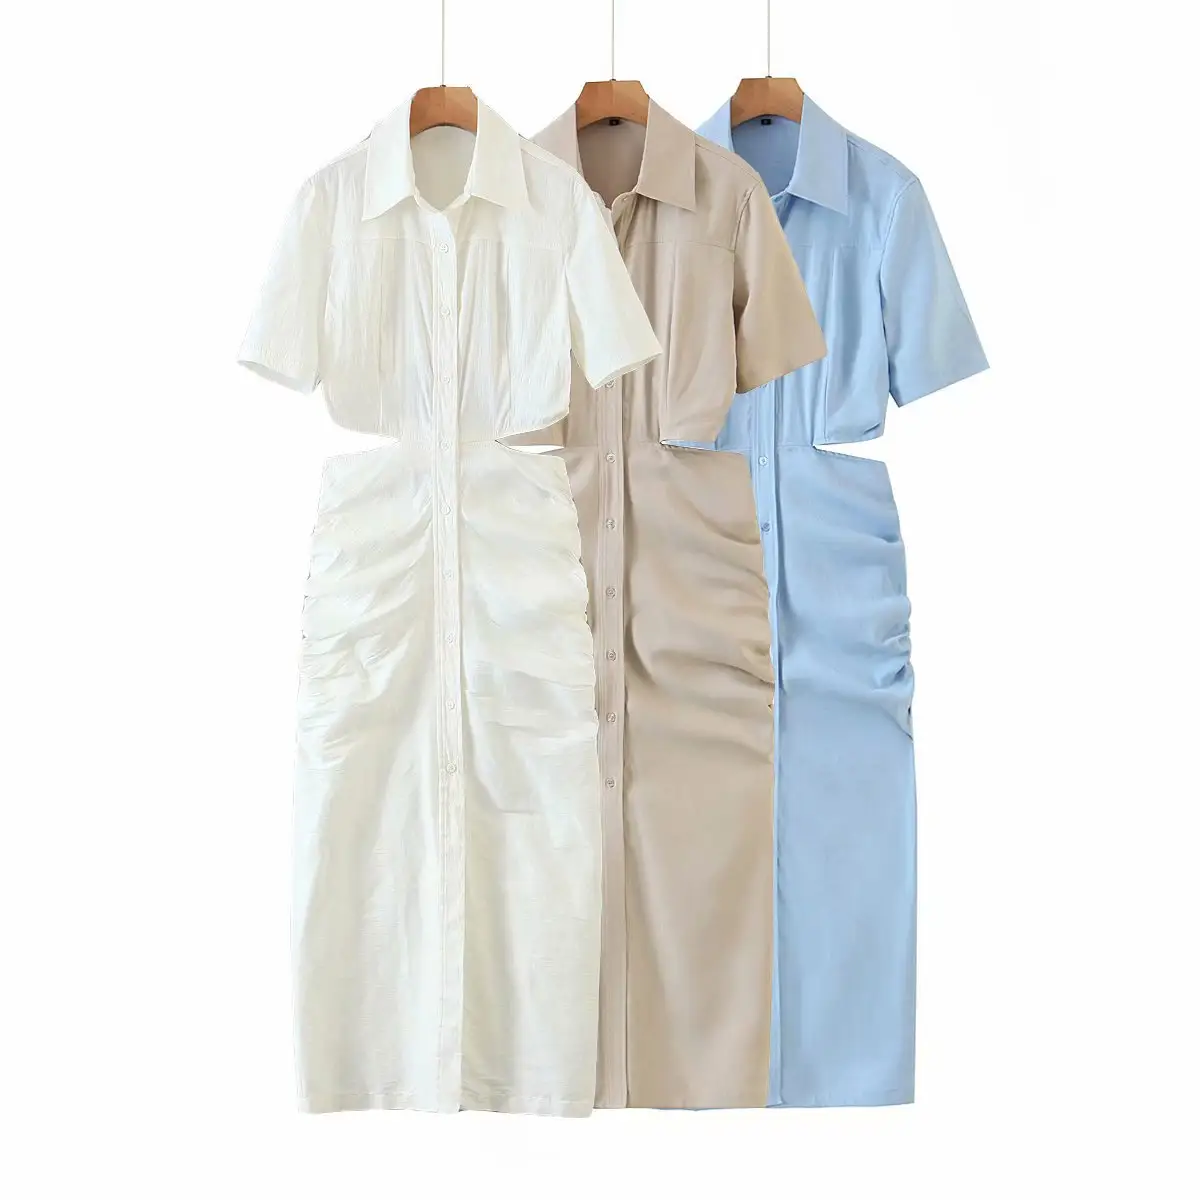 New Summer Coming Items Full Button White Dress Ladies Short Sleeve Elegant Cut Hollow Out Dress